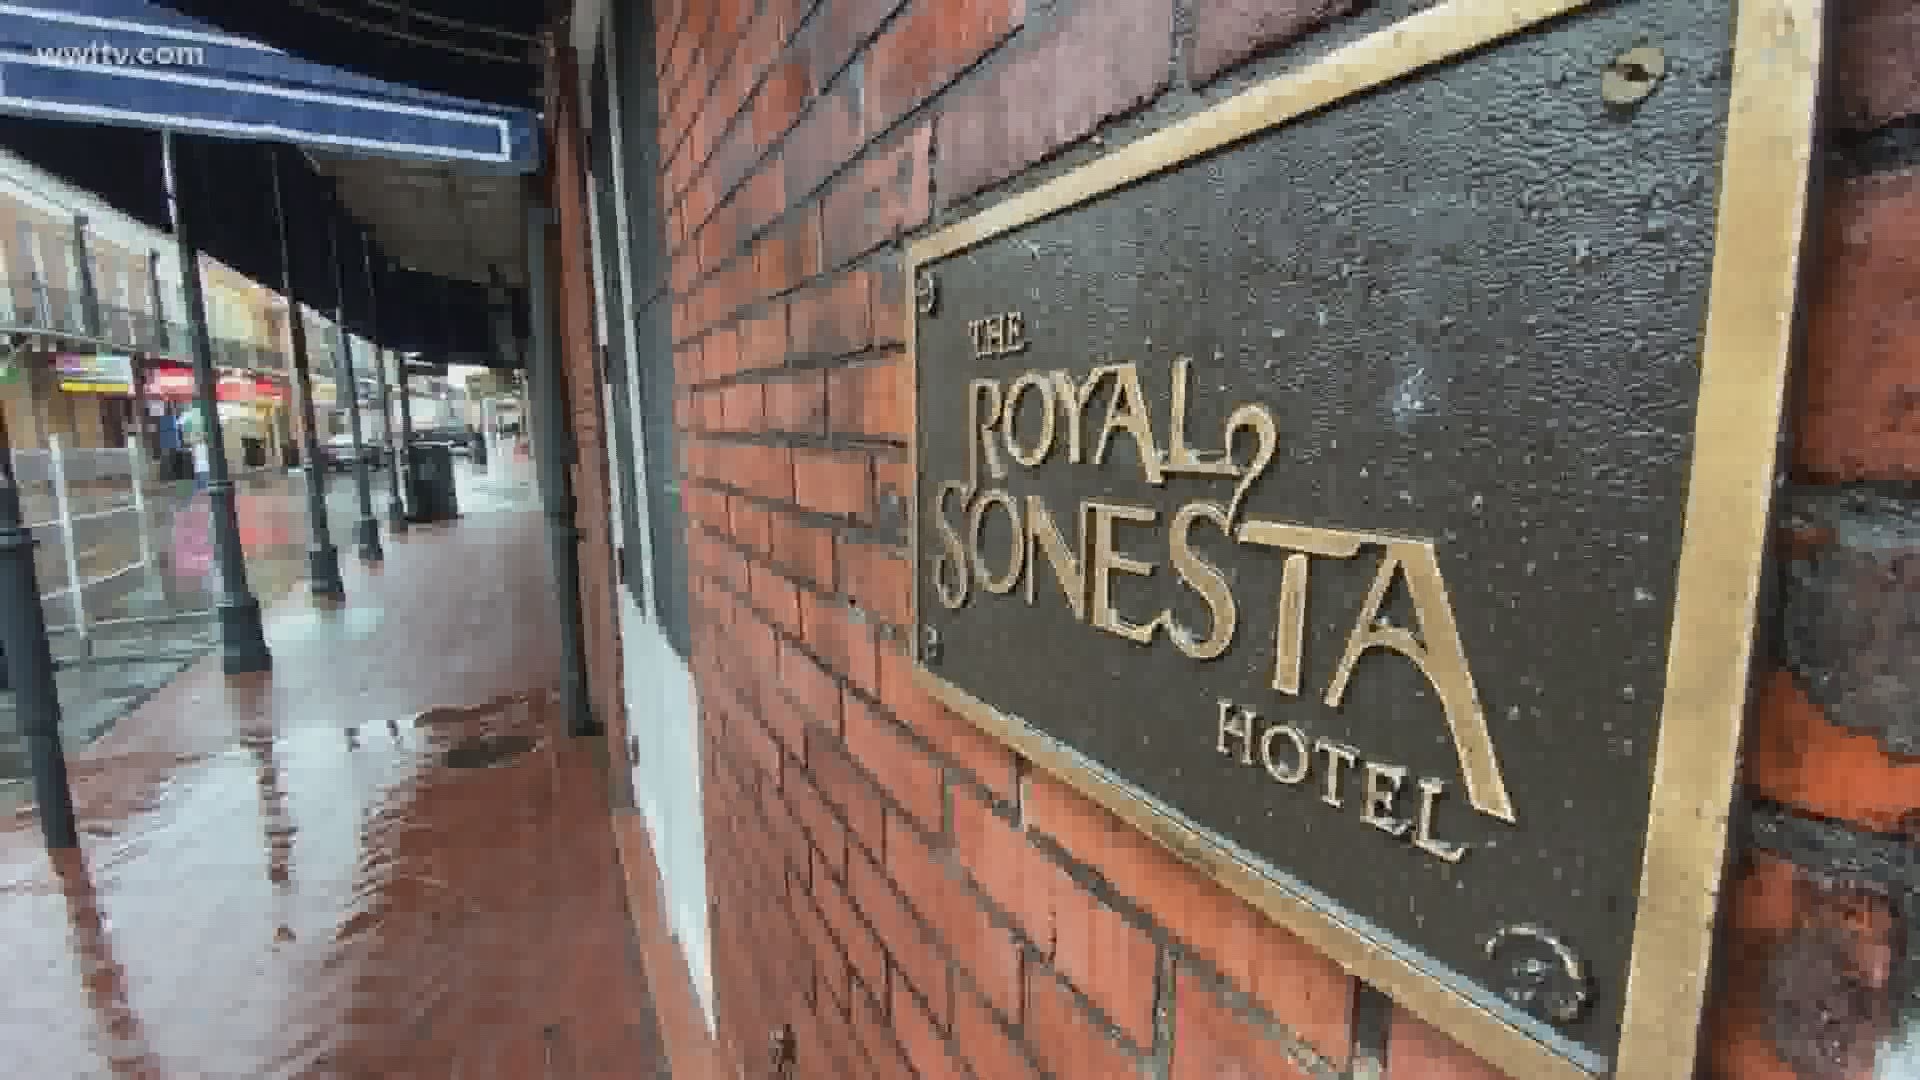 Groos is the general manager at the Royal Sonesta.  He said the hotel has never closed since it was established in 1969, not even for Hurricane Katrina.